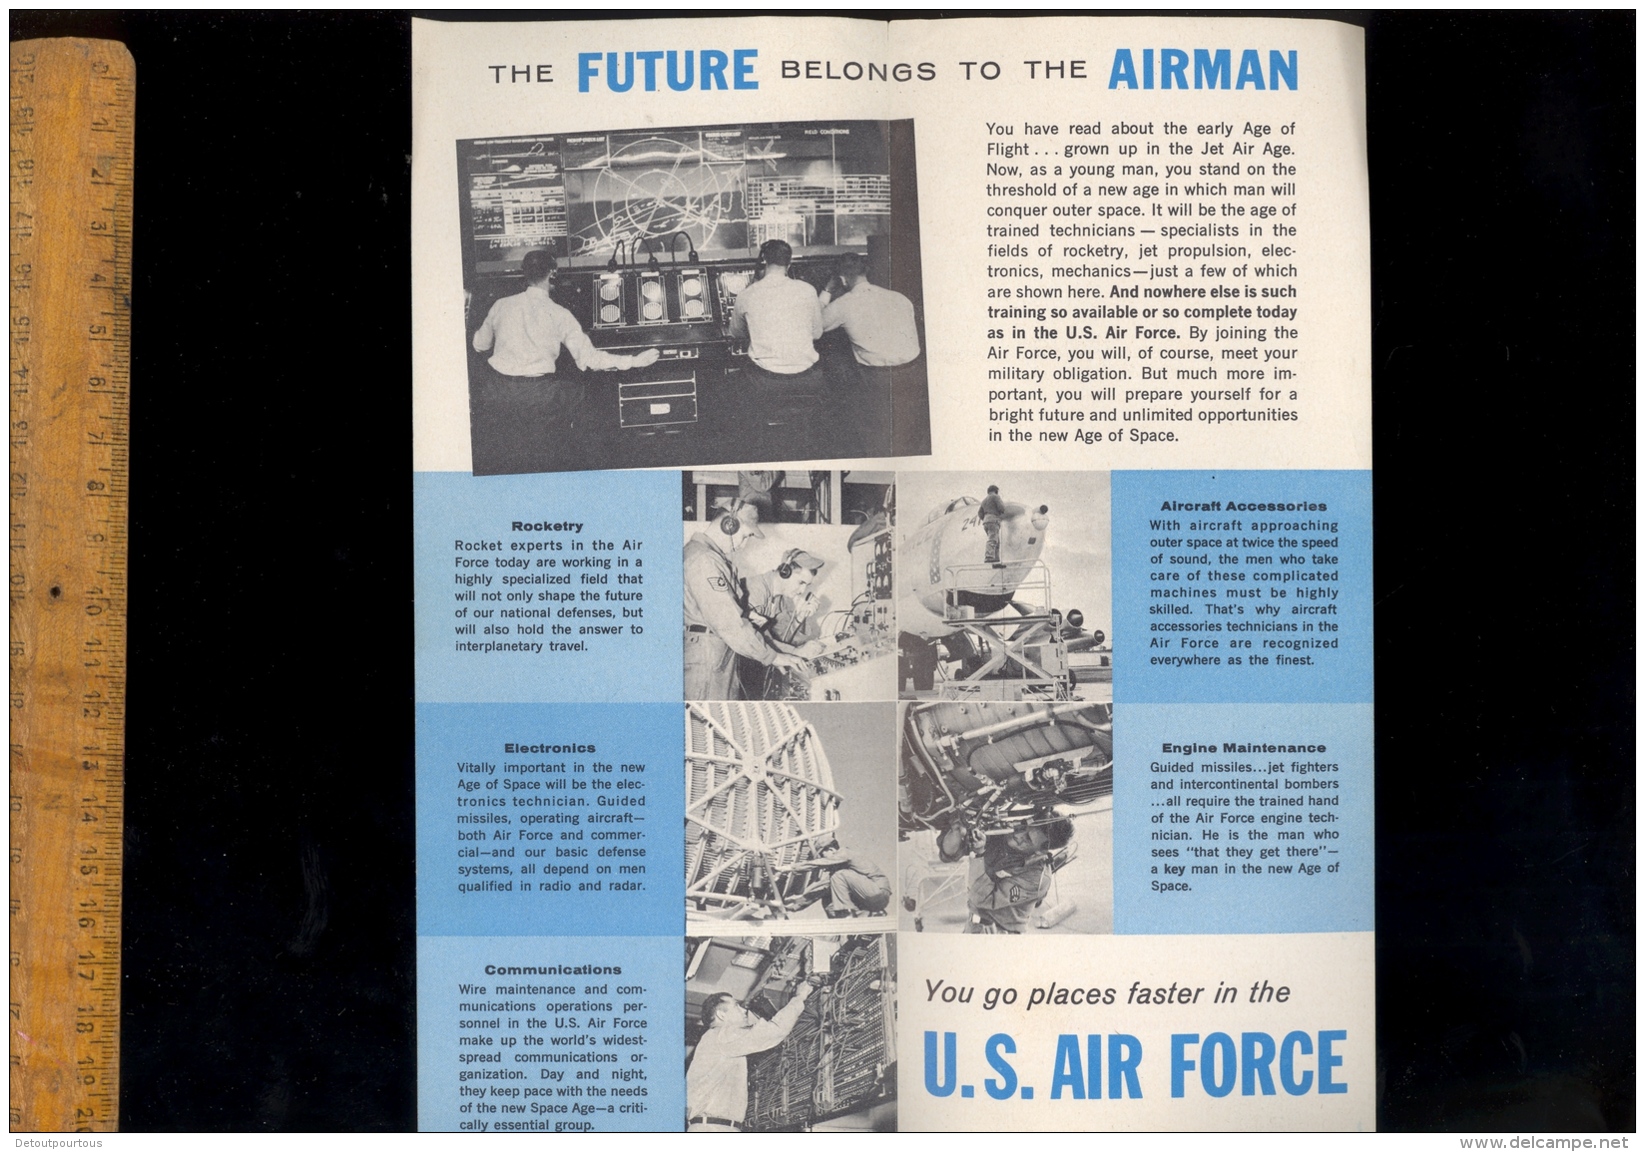 USAF US AIR FORCE Recruiting Opportunities For You In The New Age Of Space - United States